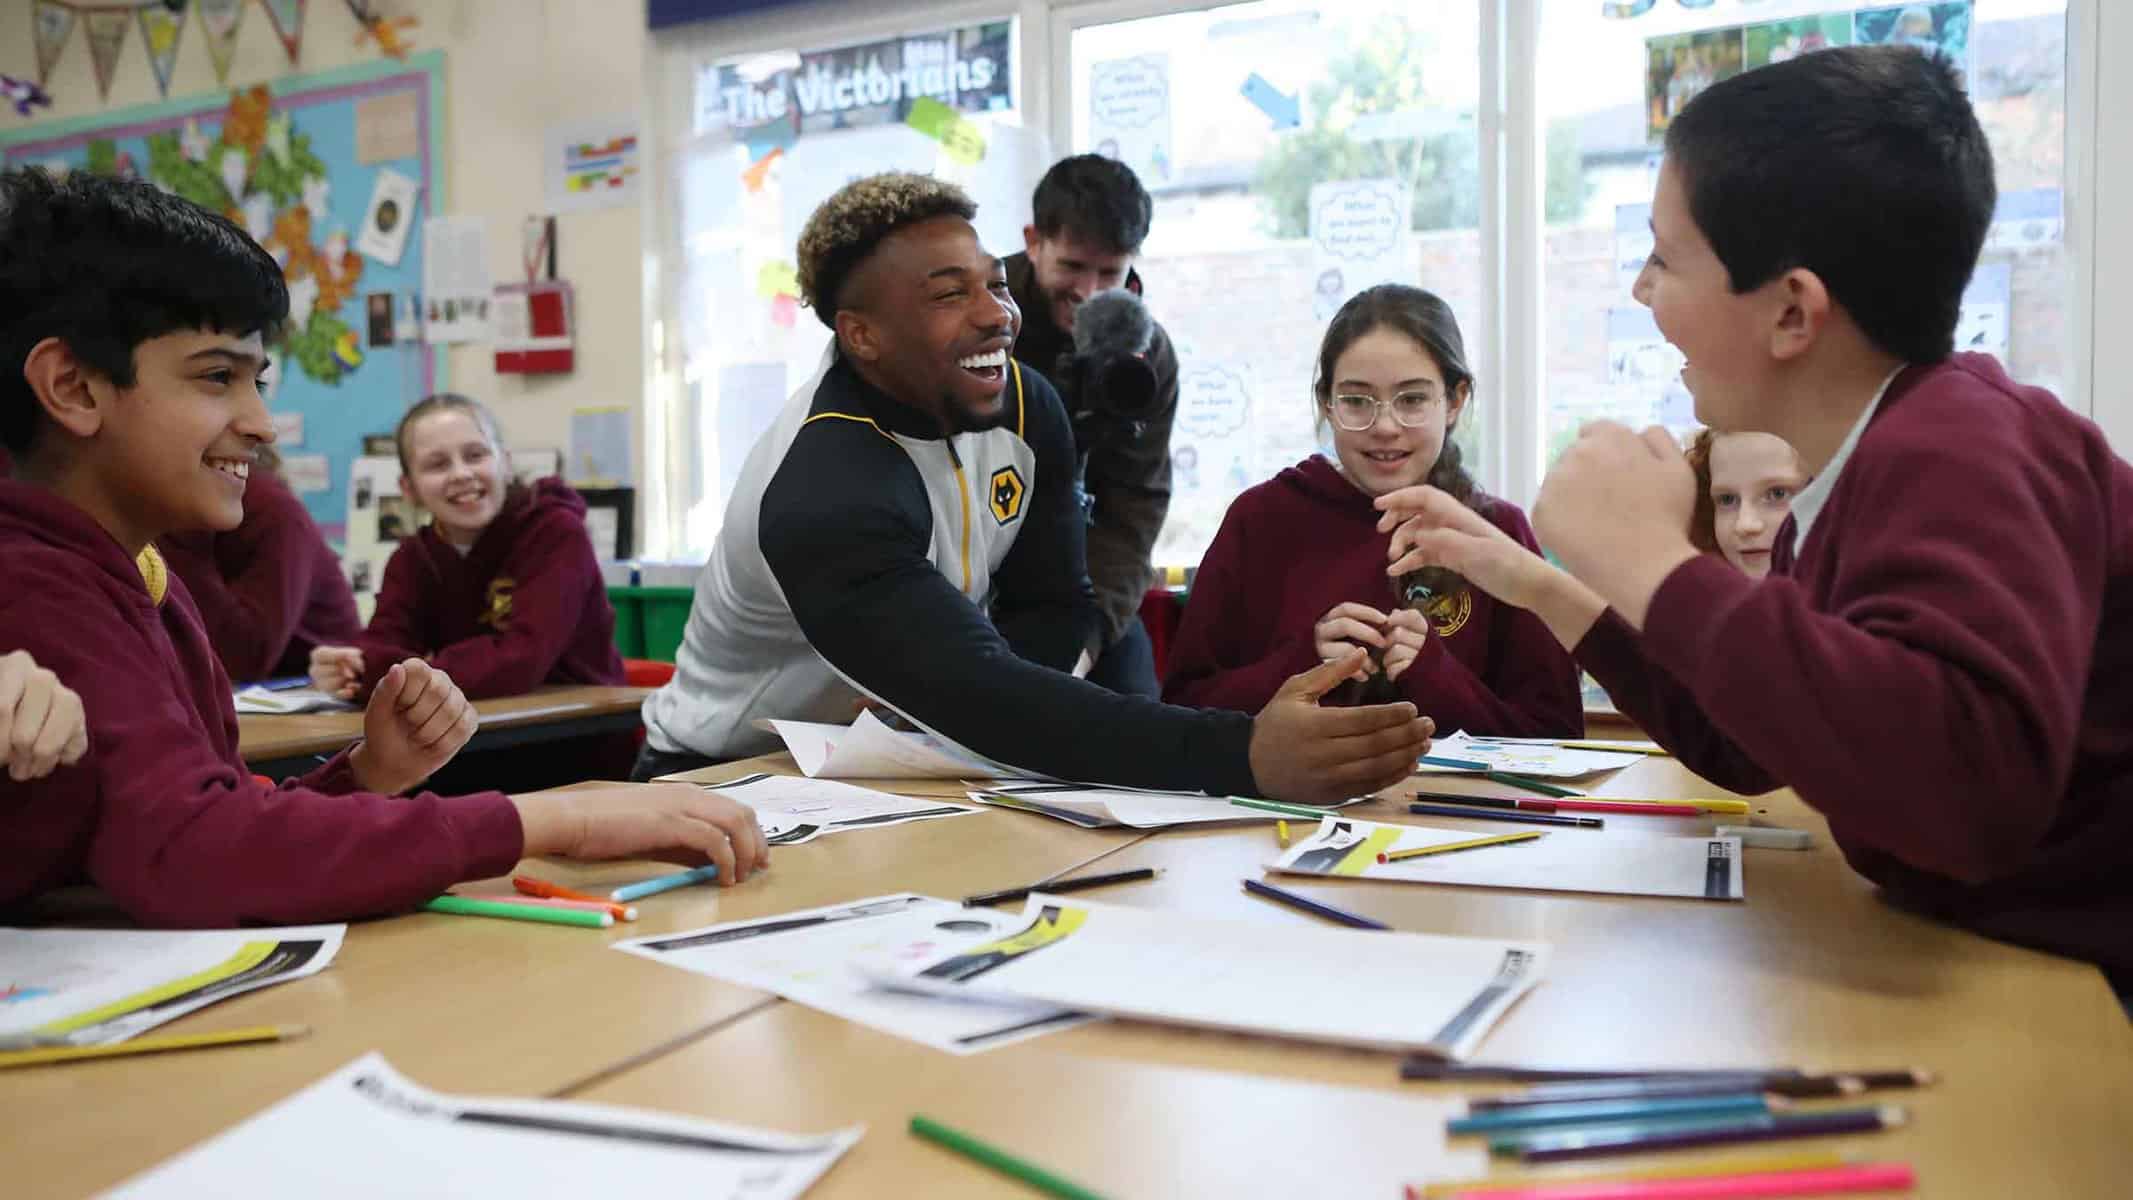 Adama visits primary school to support No Room For Racism campaign Image